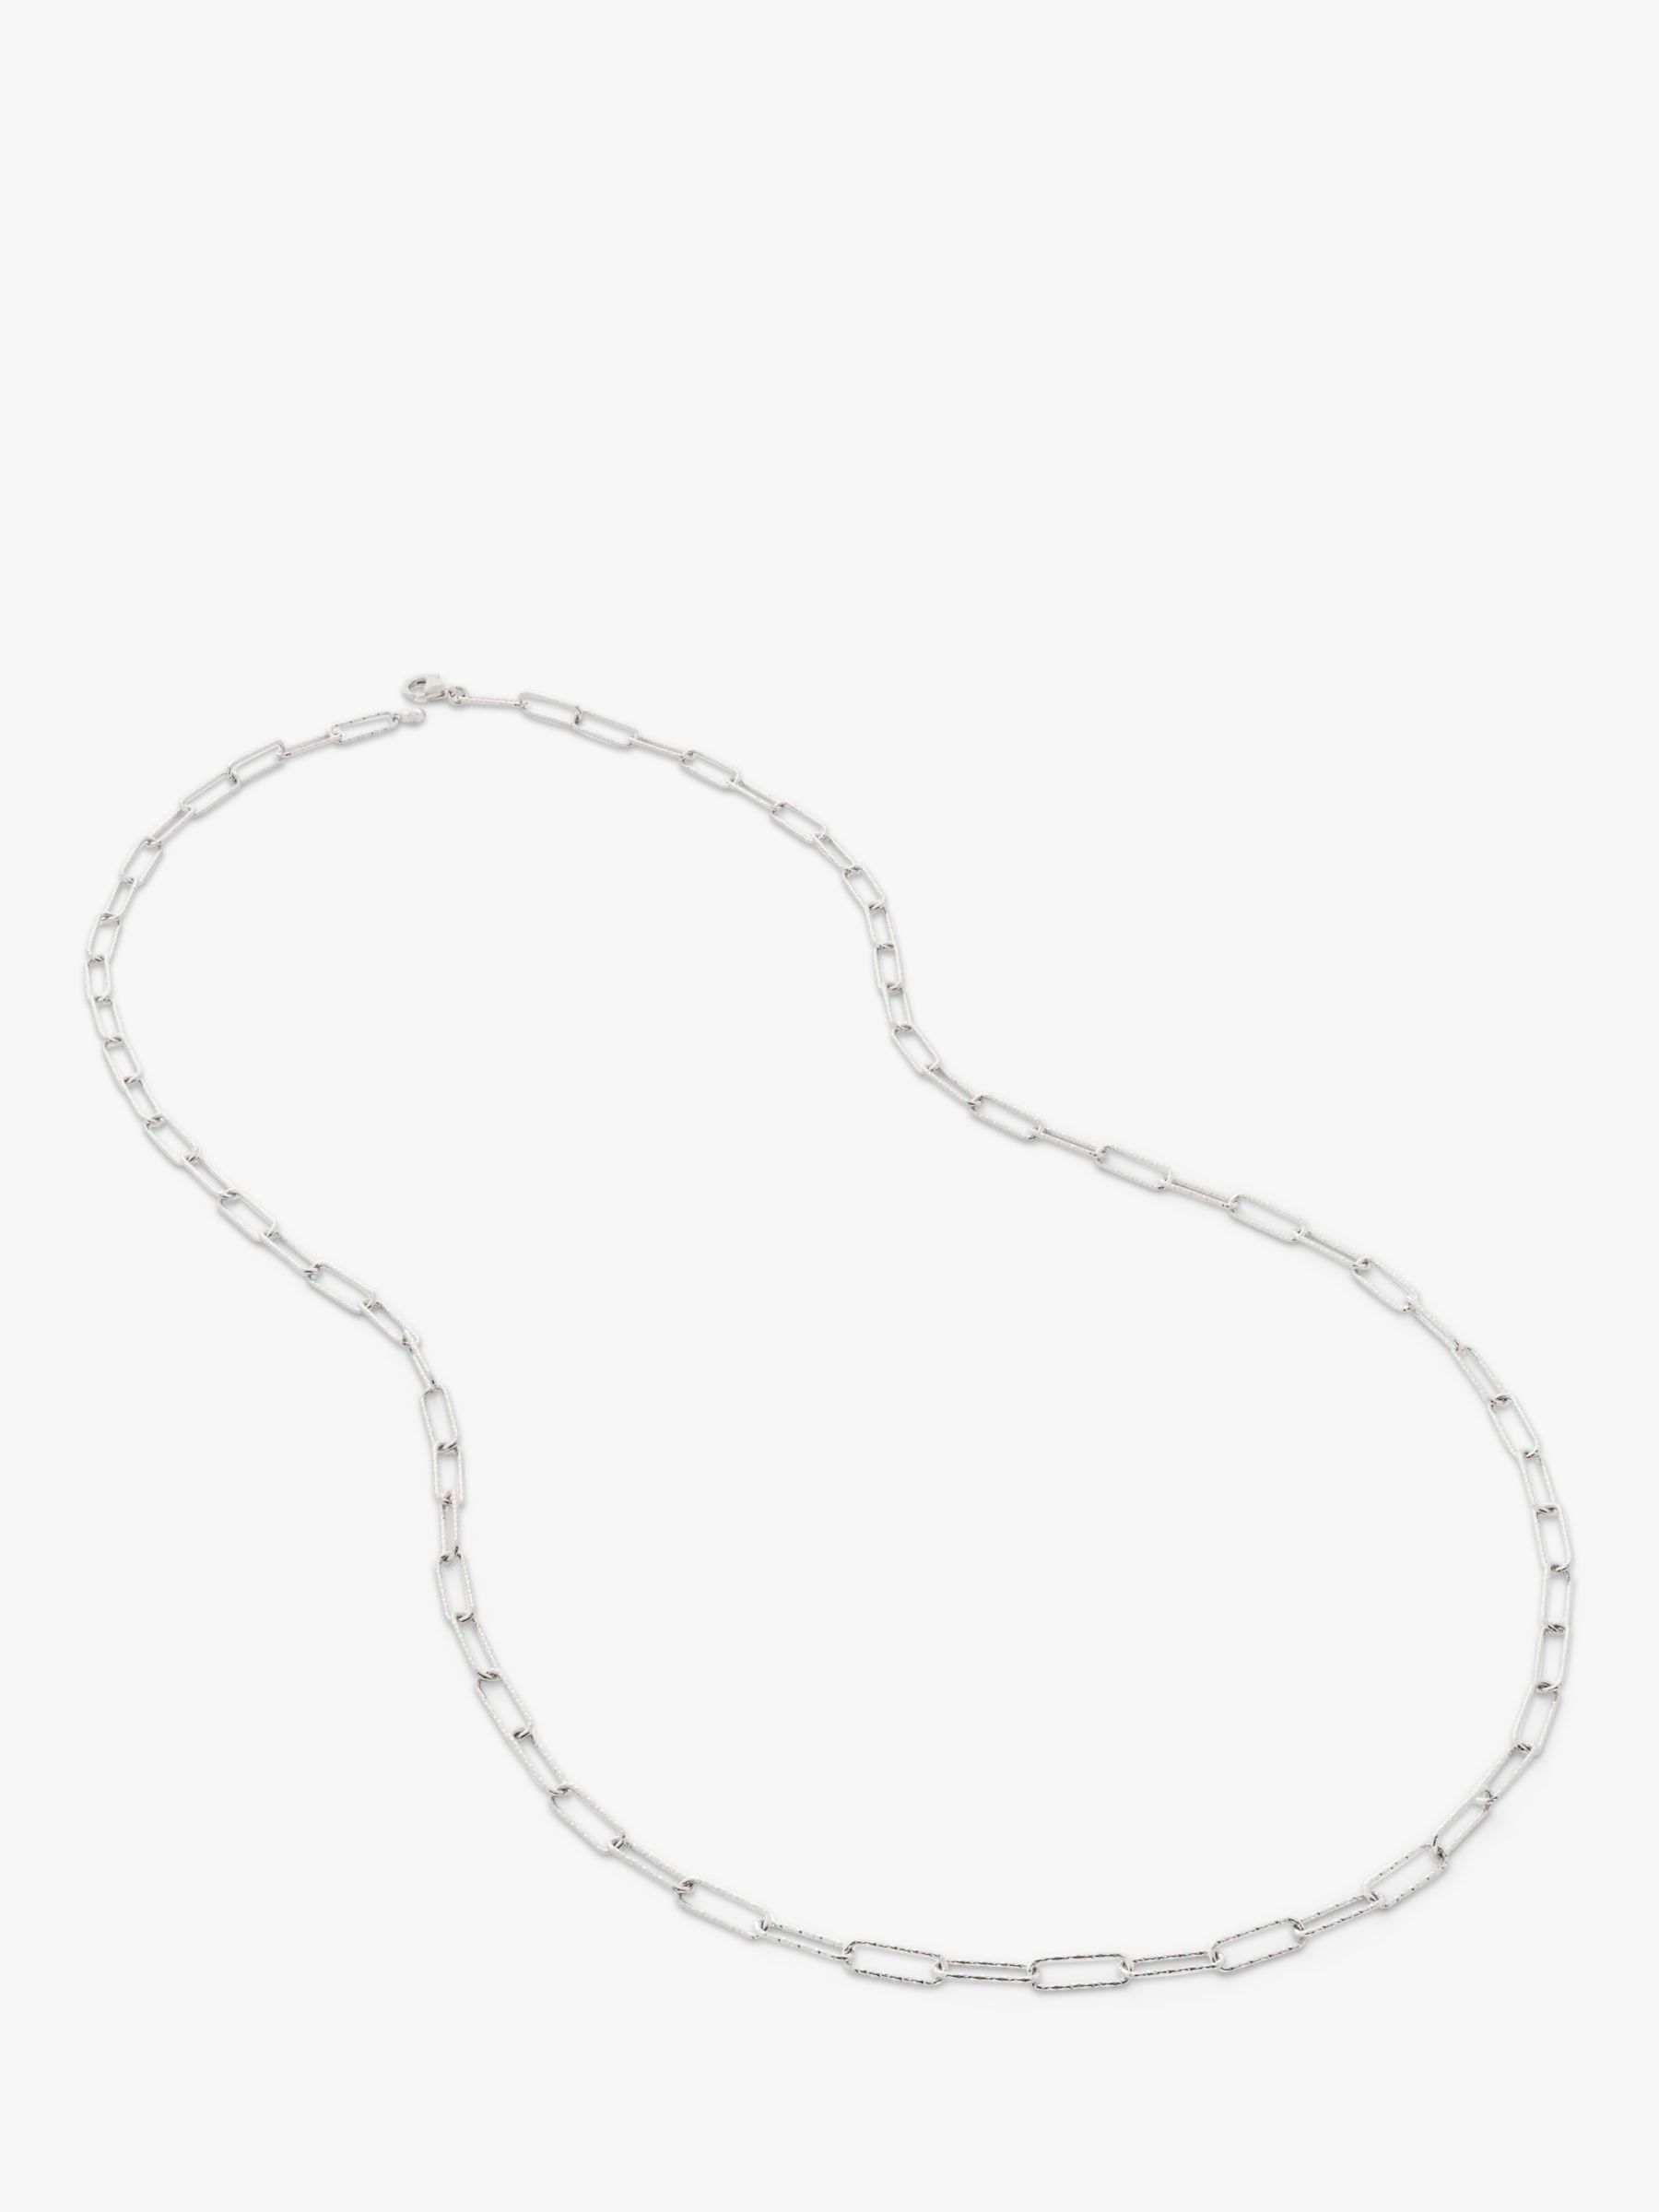 Monica Vinader Alta Textured Link Chain Necklace, Silver at John Lewis ...